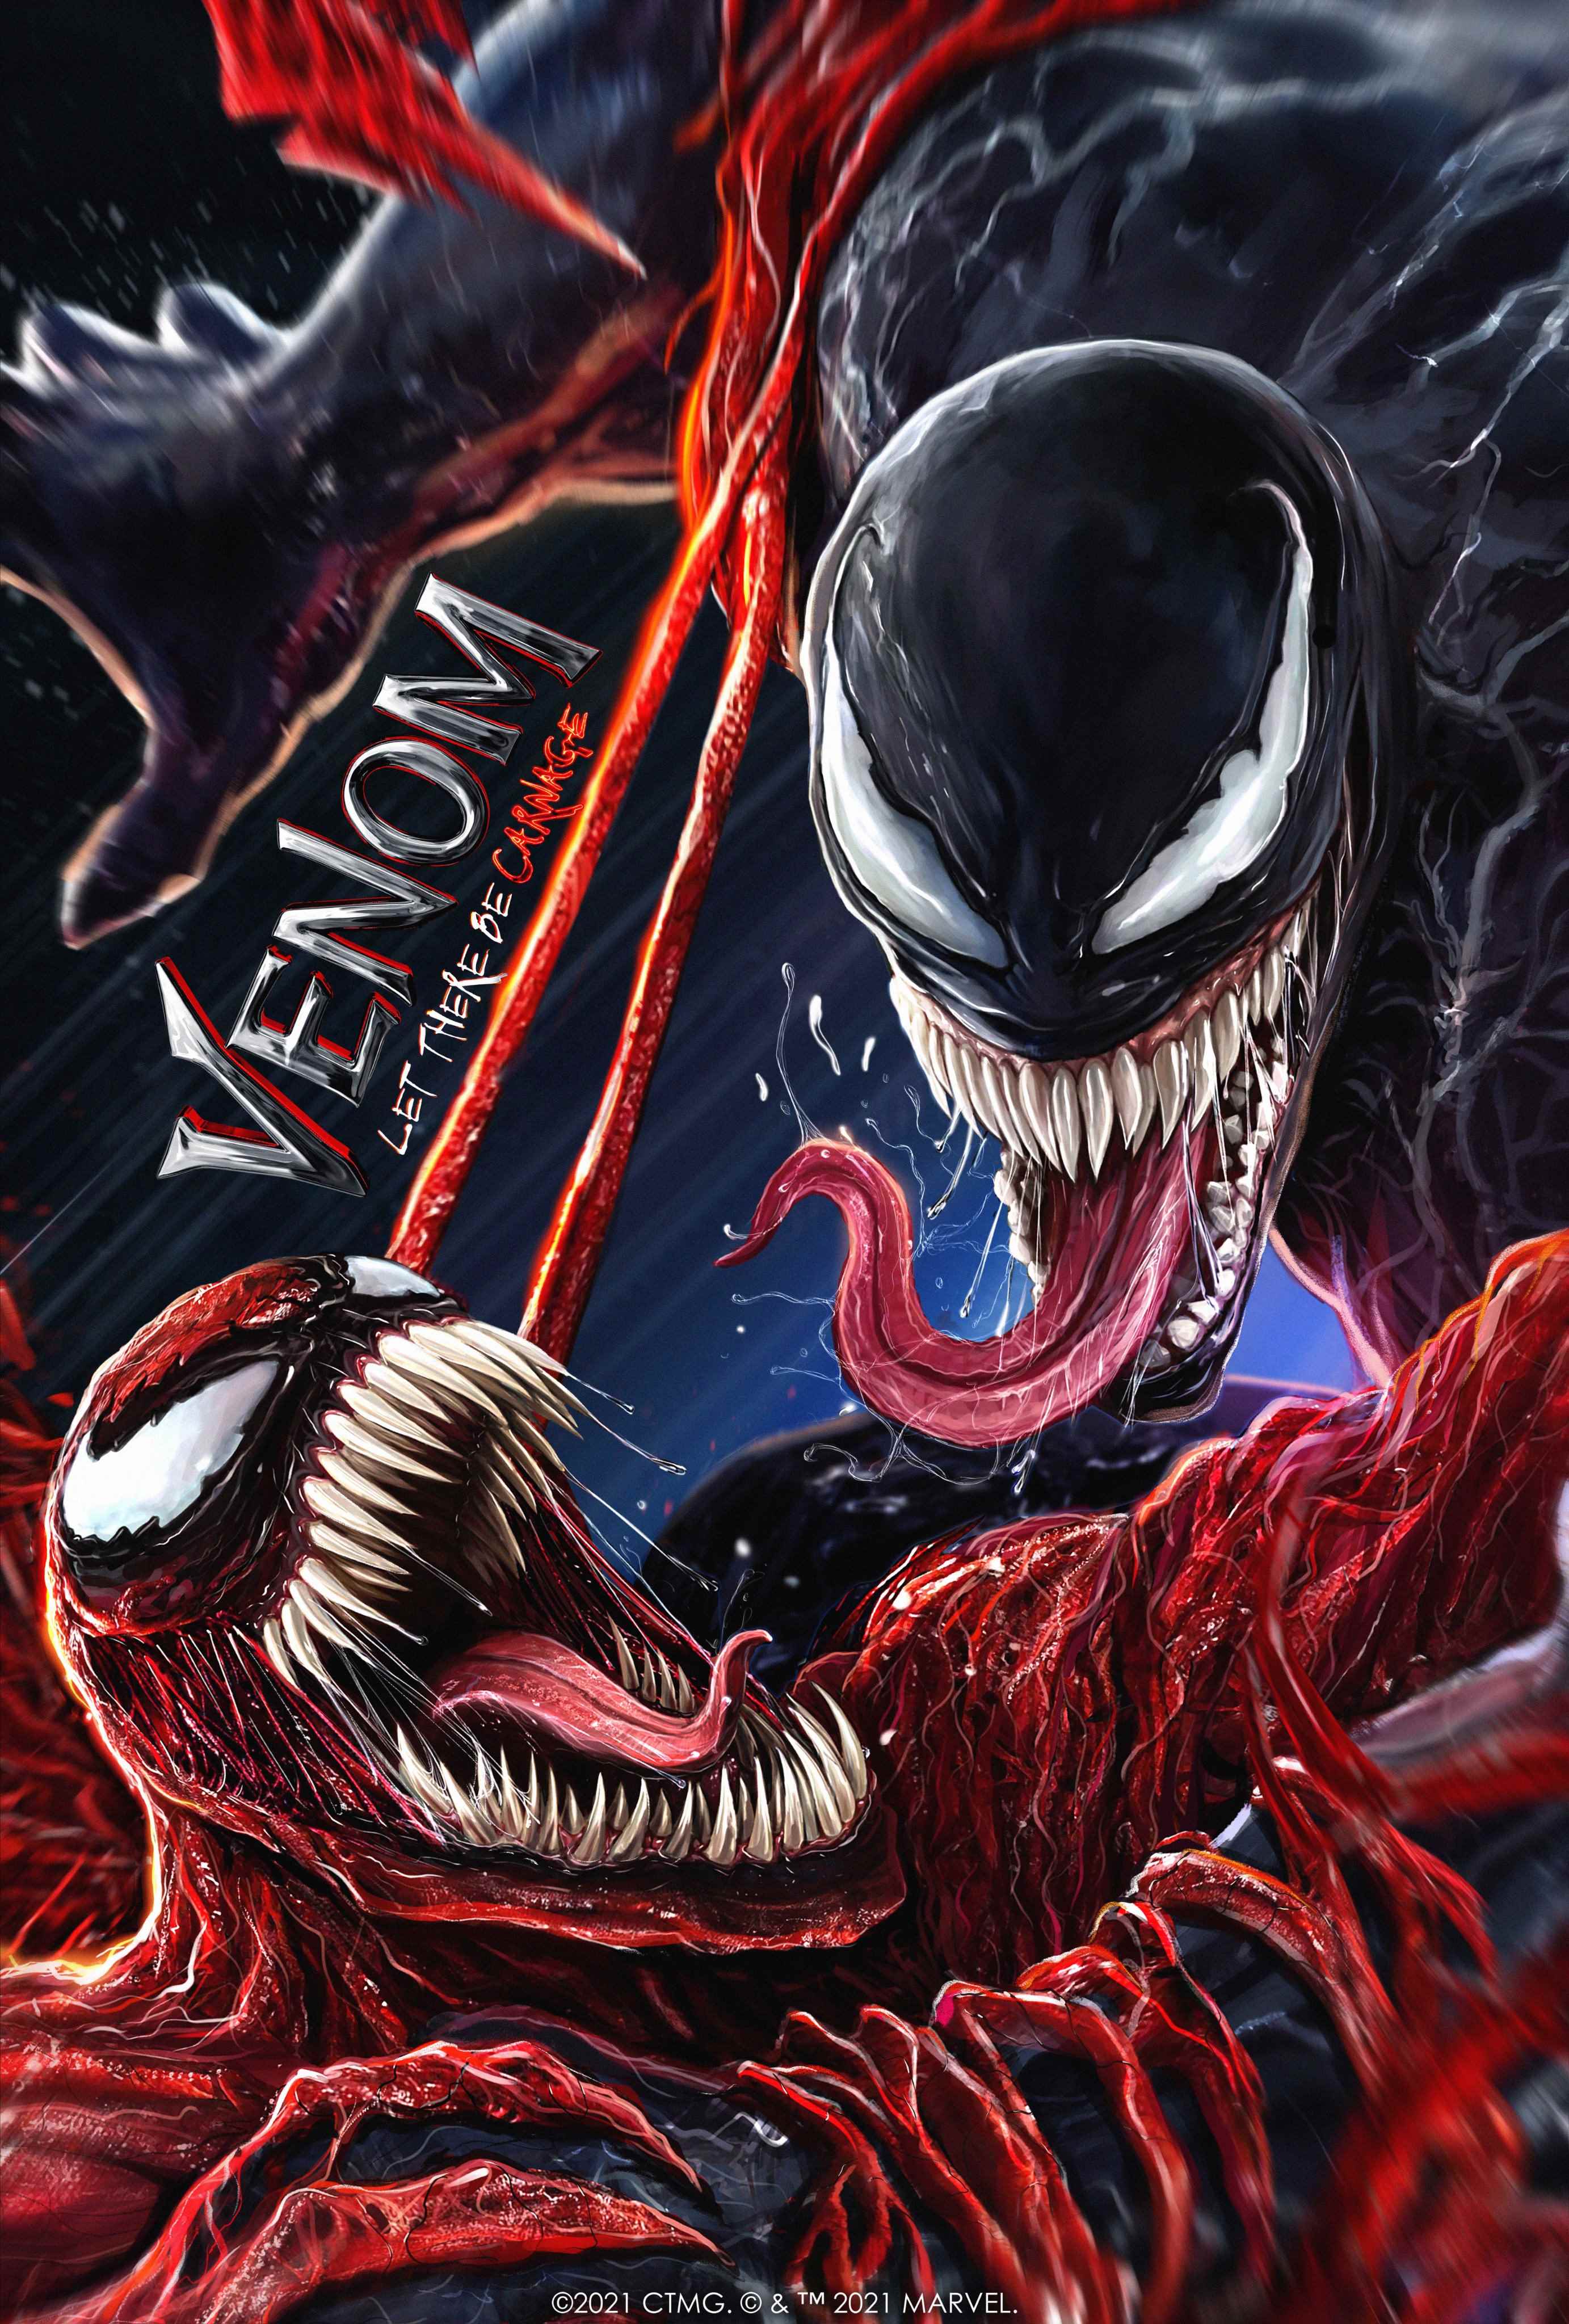 Venom Let There Be Carnage 4K Digital Art 2021 Wallpapers.